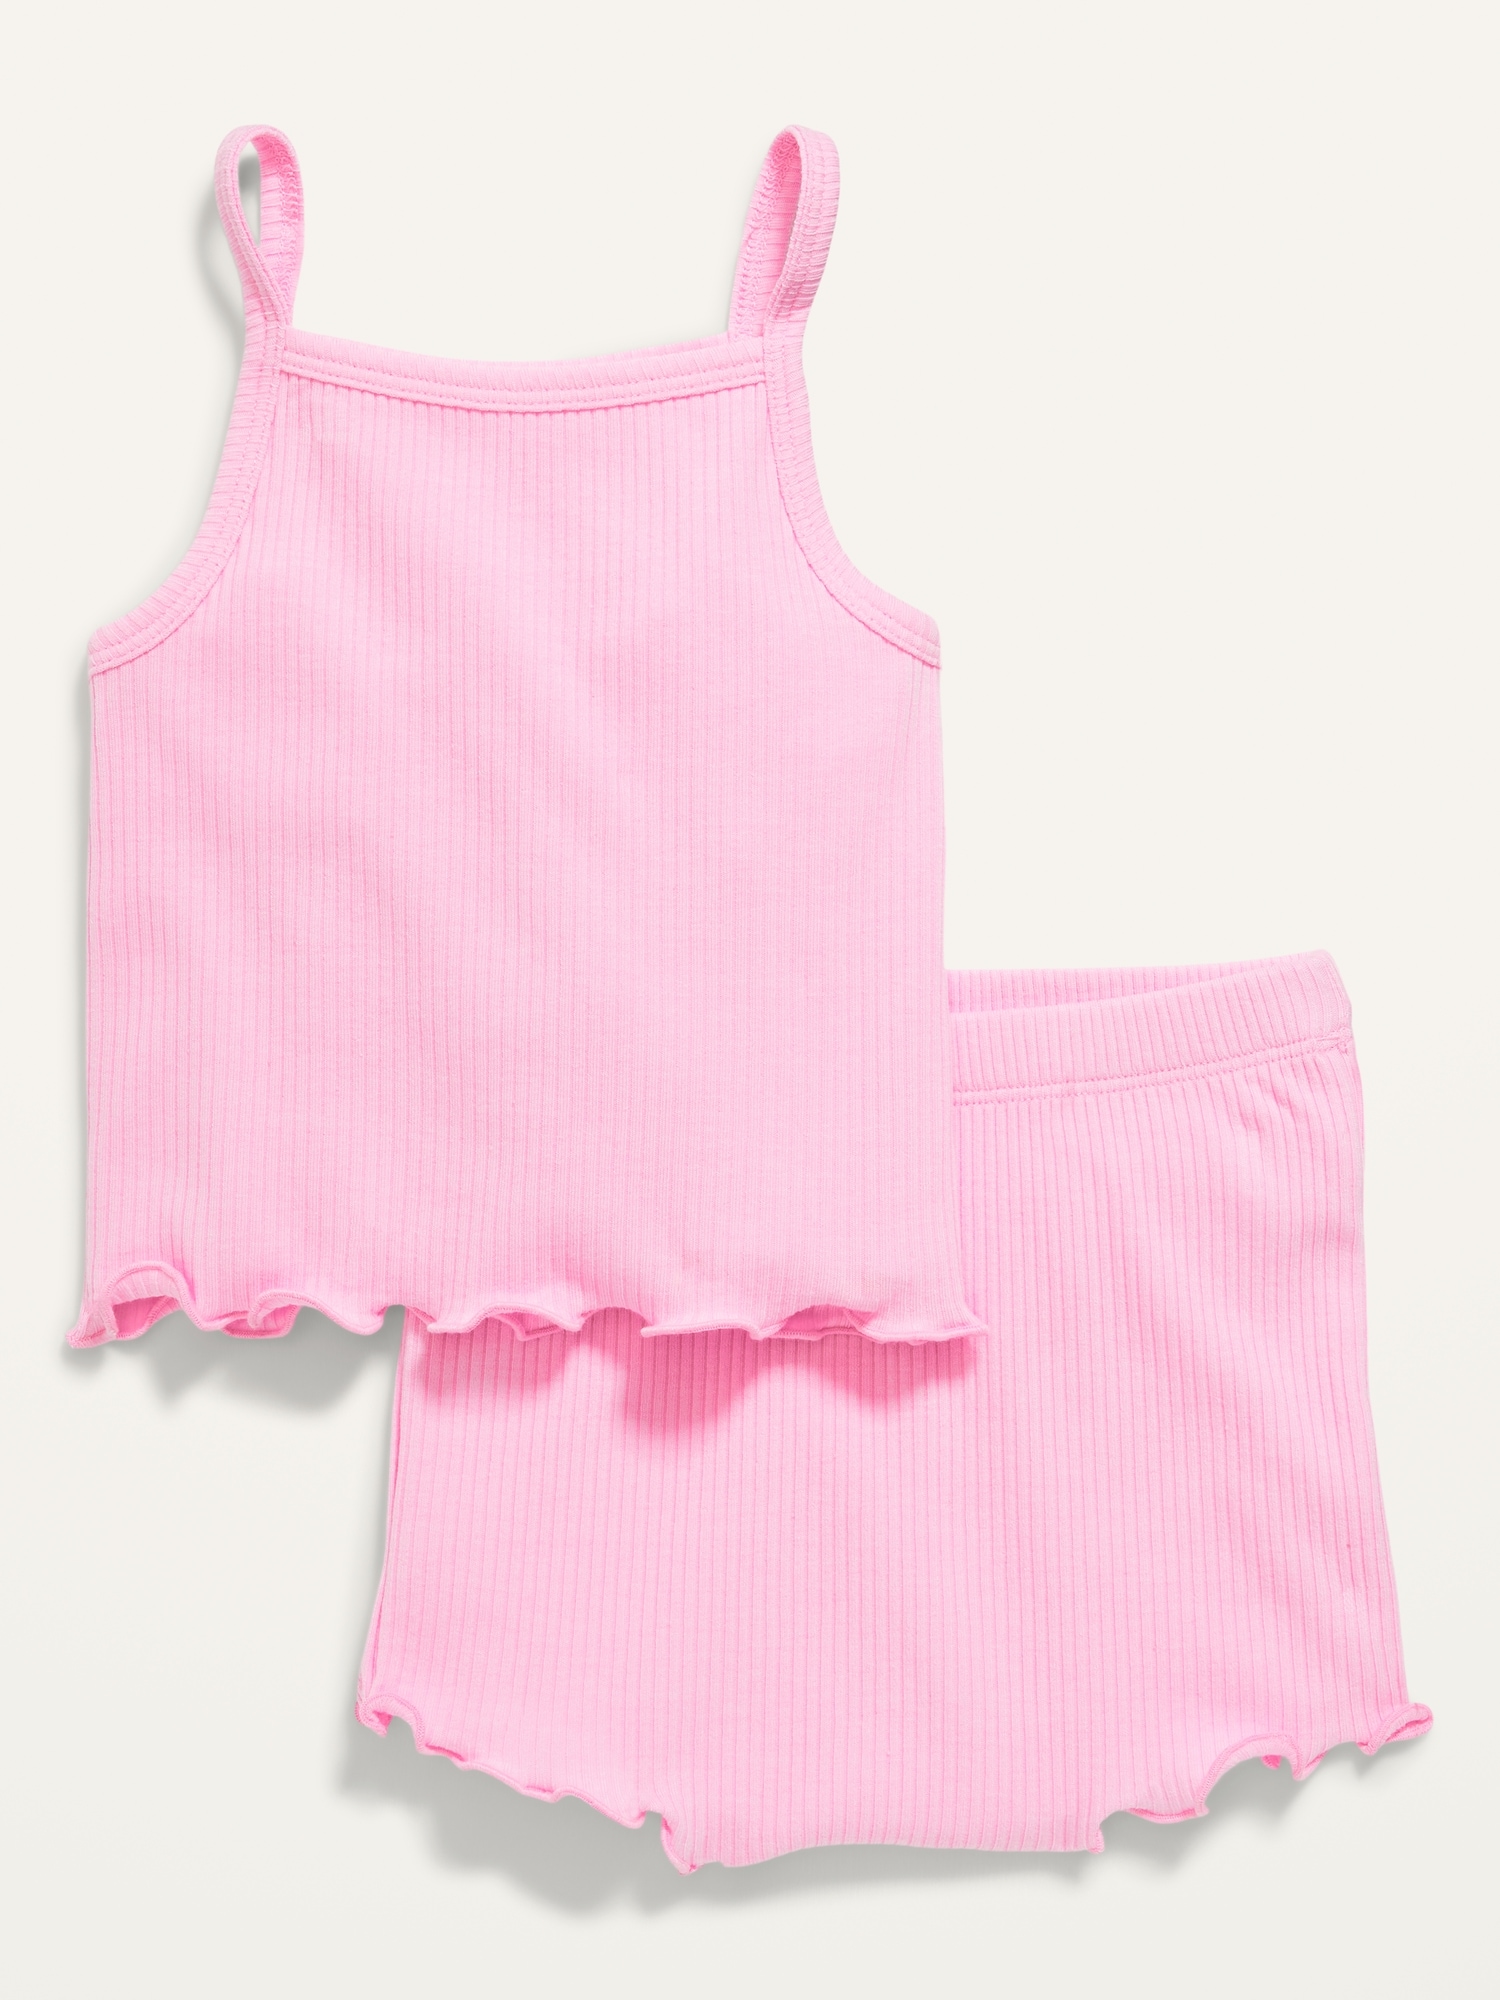 Old Navy baby girl tank tops 18-24 month 